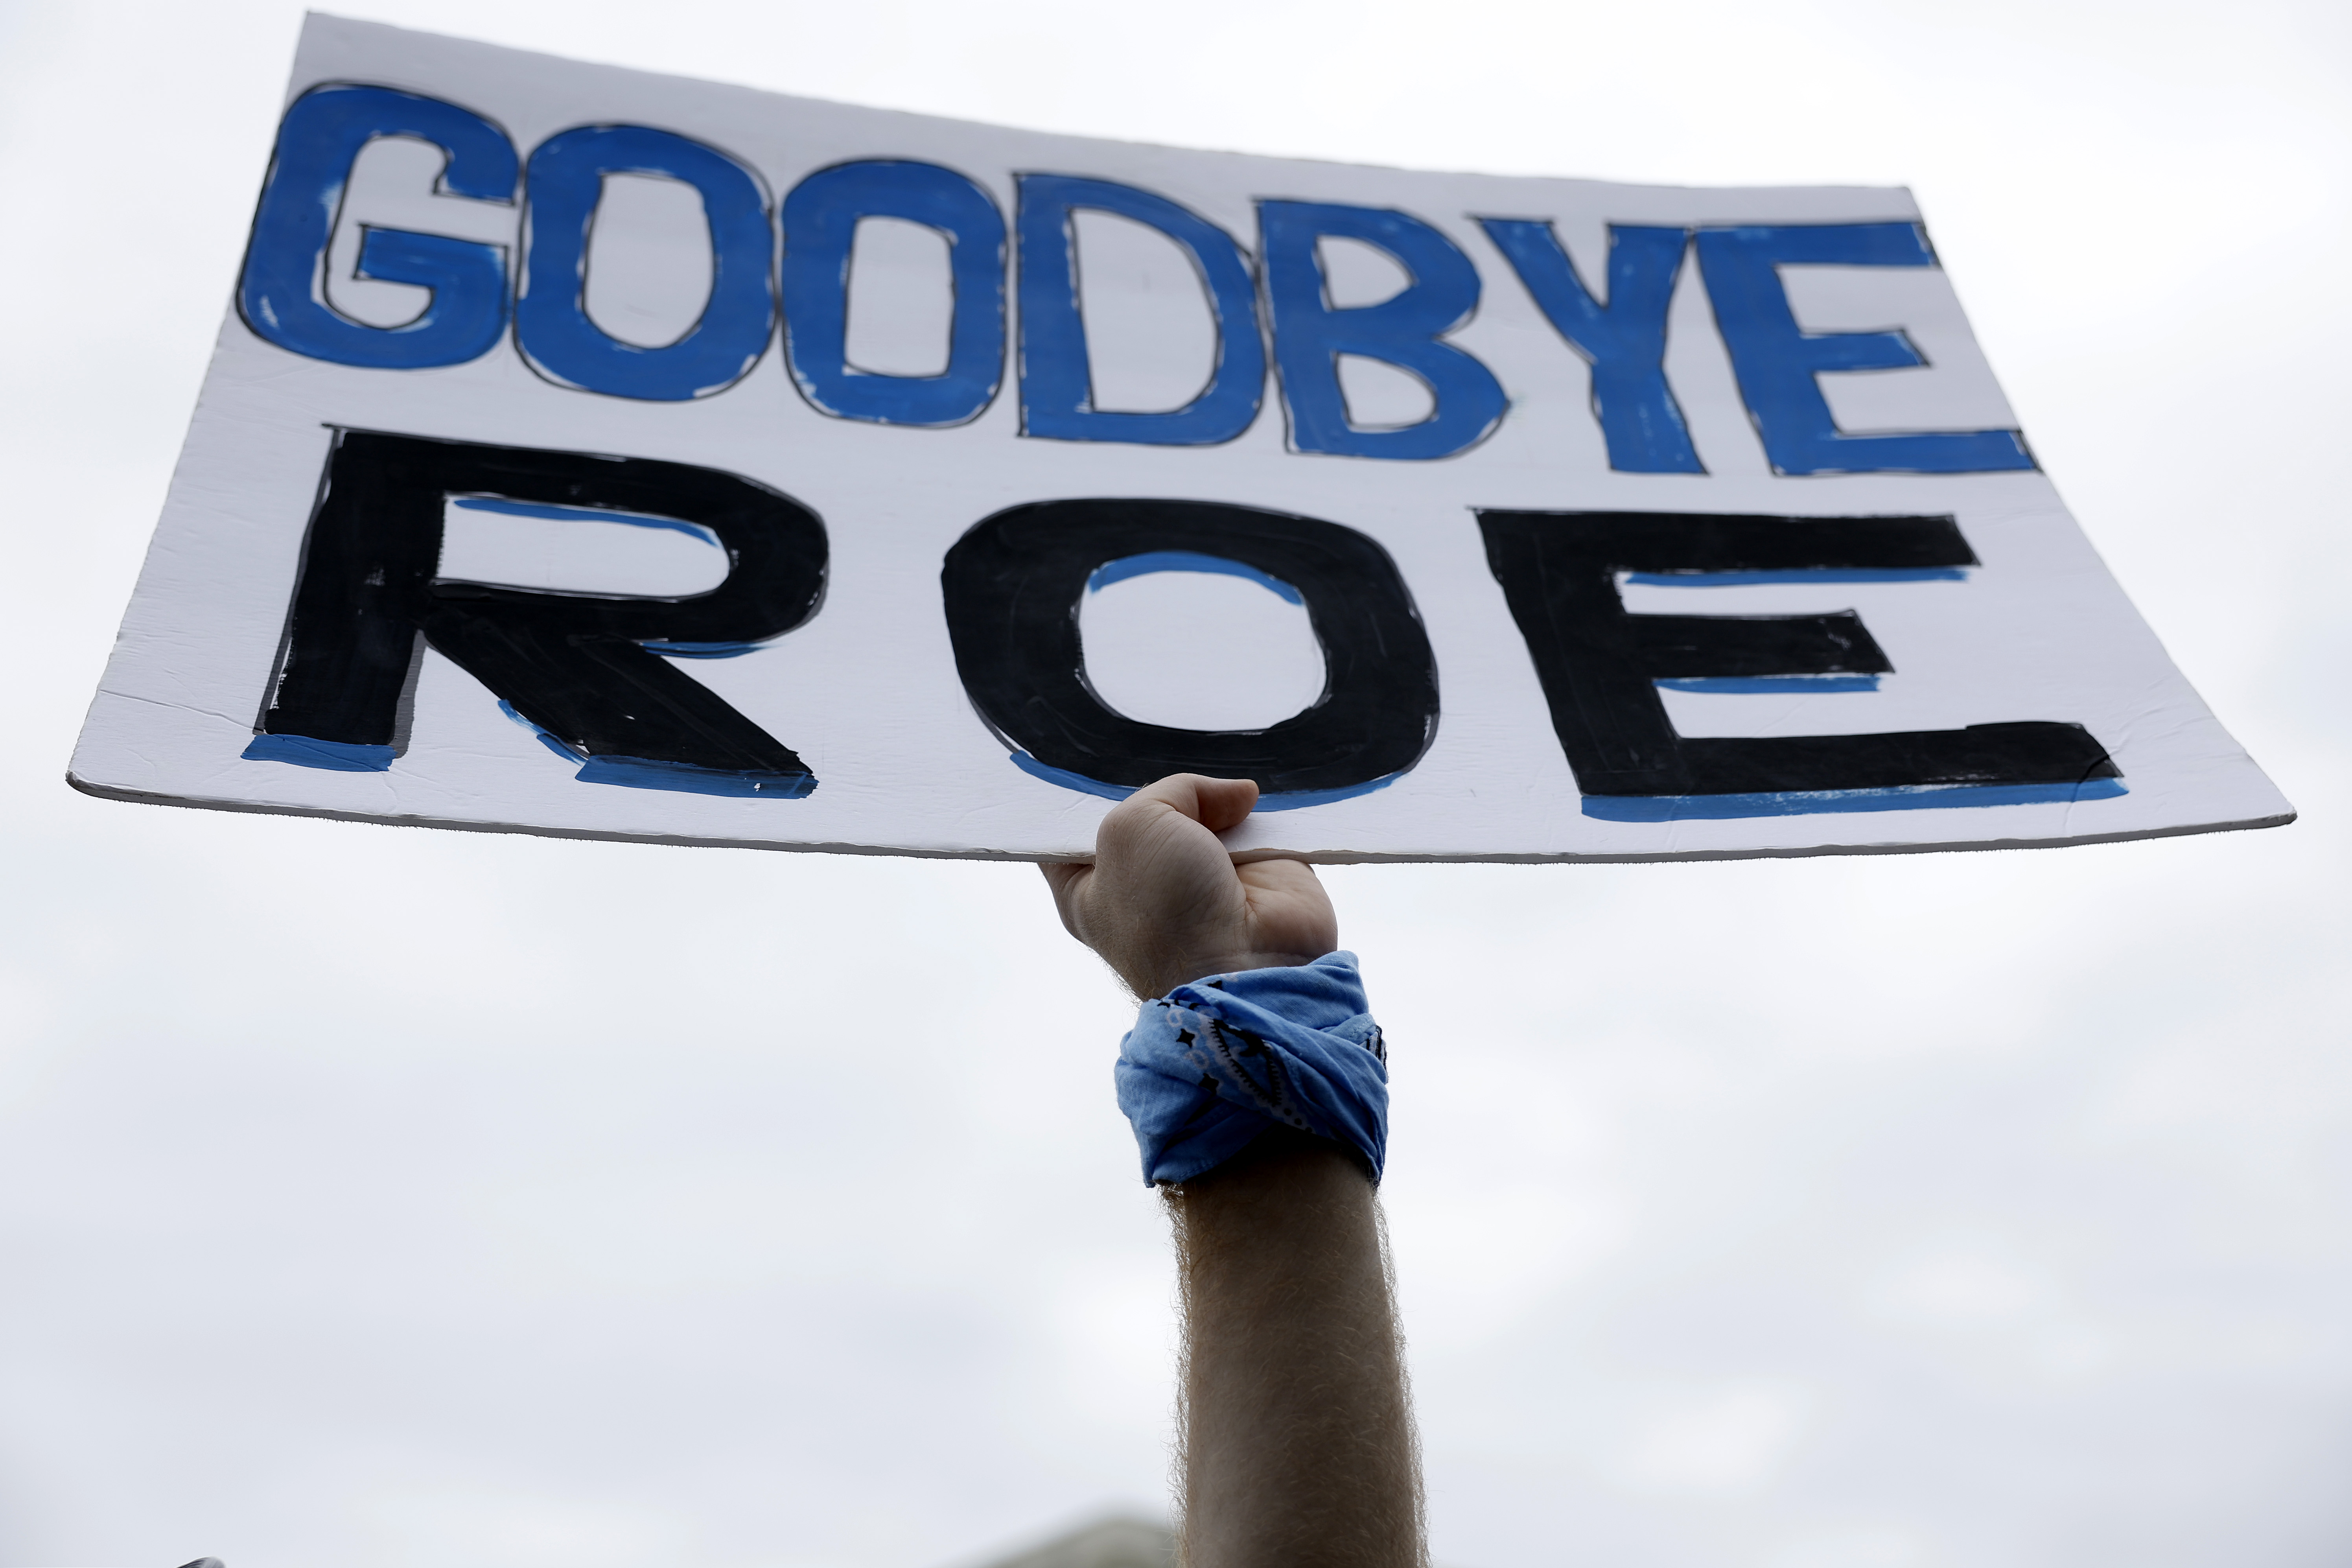 Anti-abortion protester holds sign saying “Goodbye Roe”